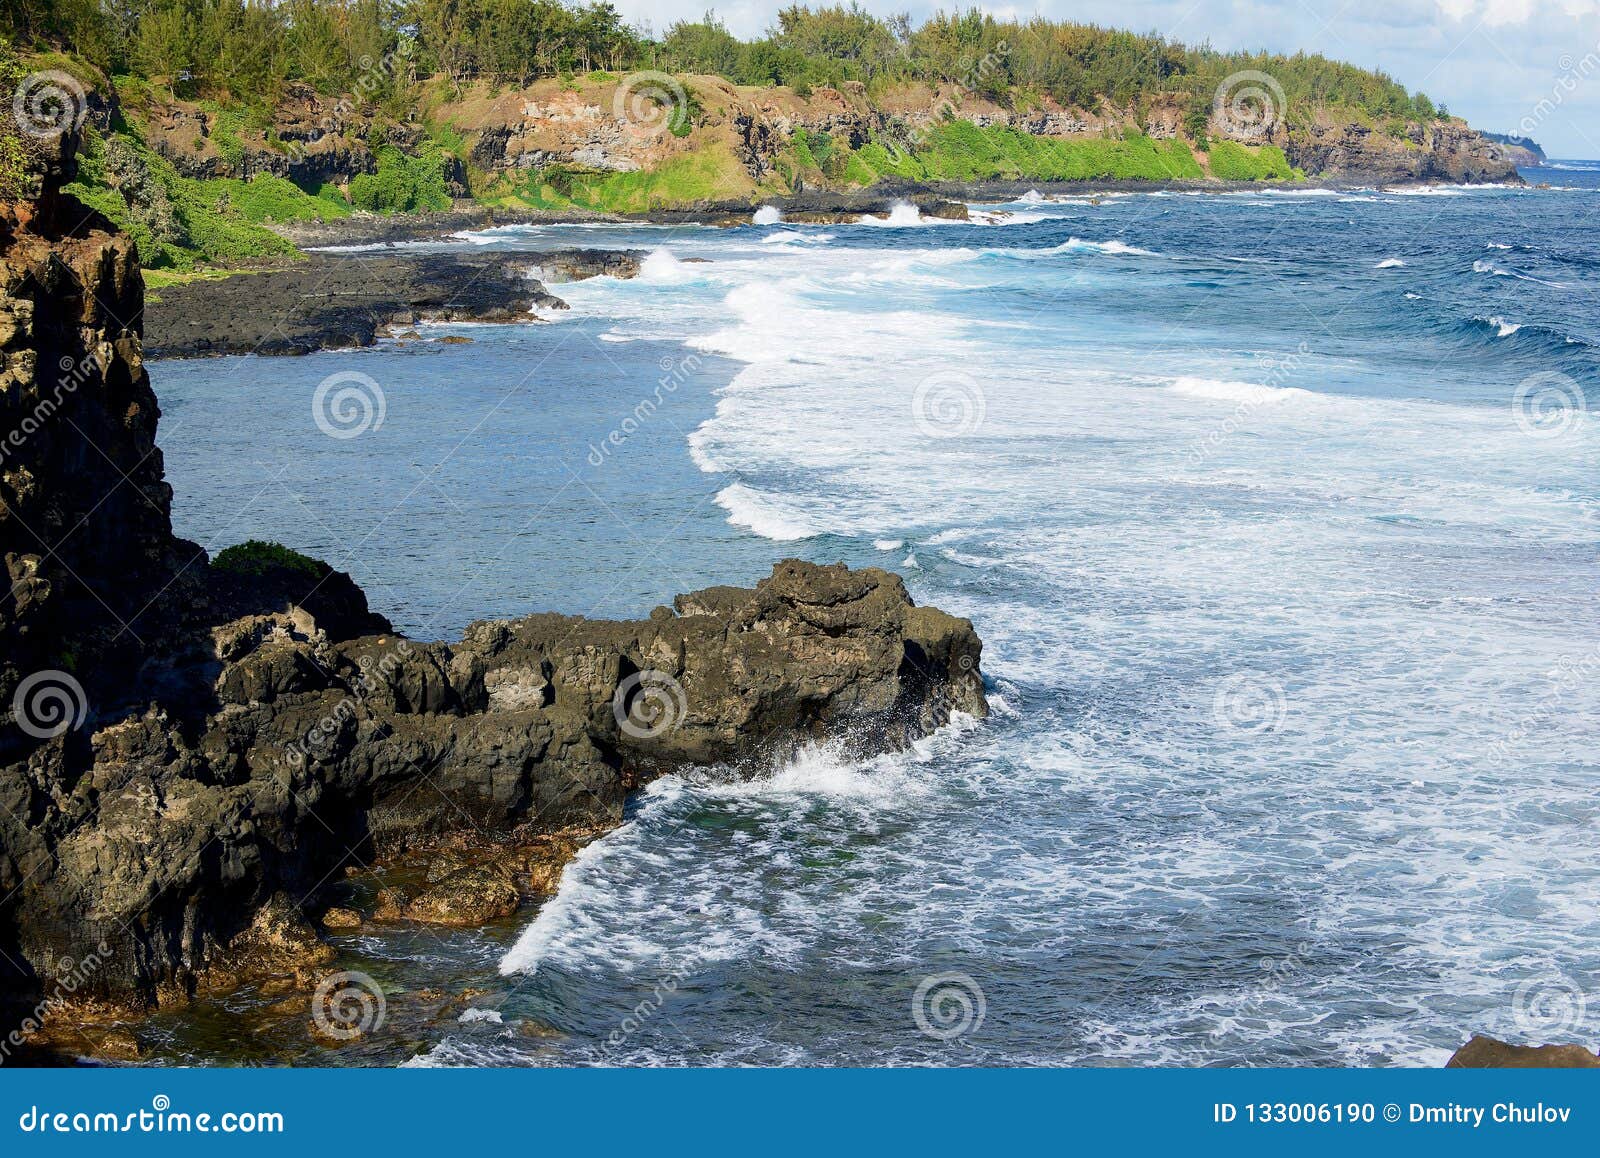 beautiful gris-gris beach with blue sky and indian ocean waves at mauritius island.